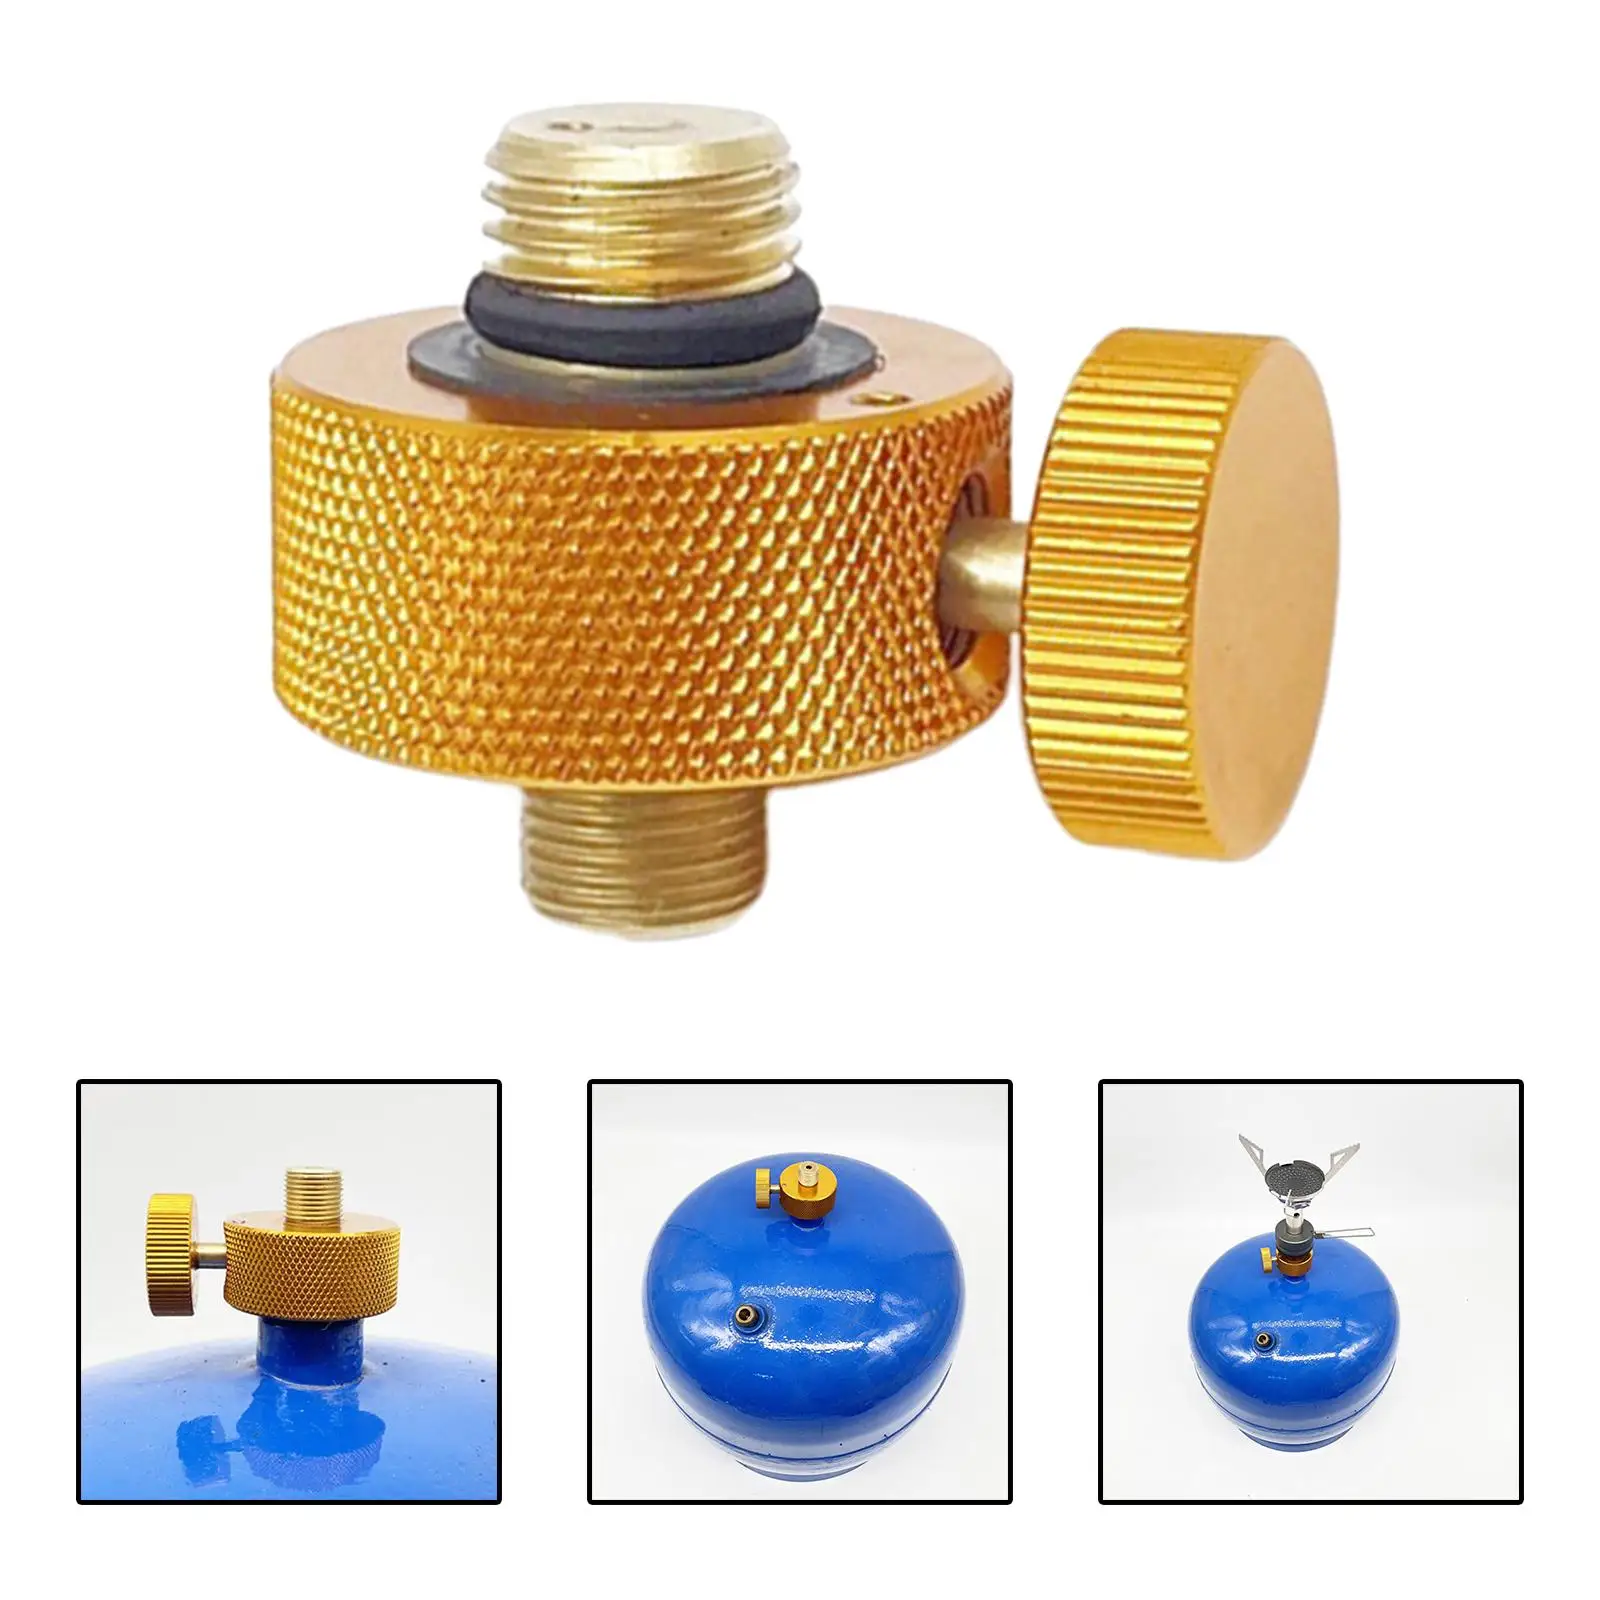 Camping Furnace Adapter Connector Gas Tank Adapter for Picnic Hiking Camping